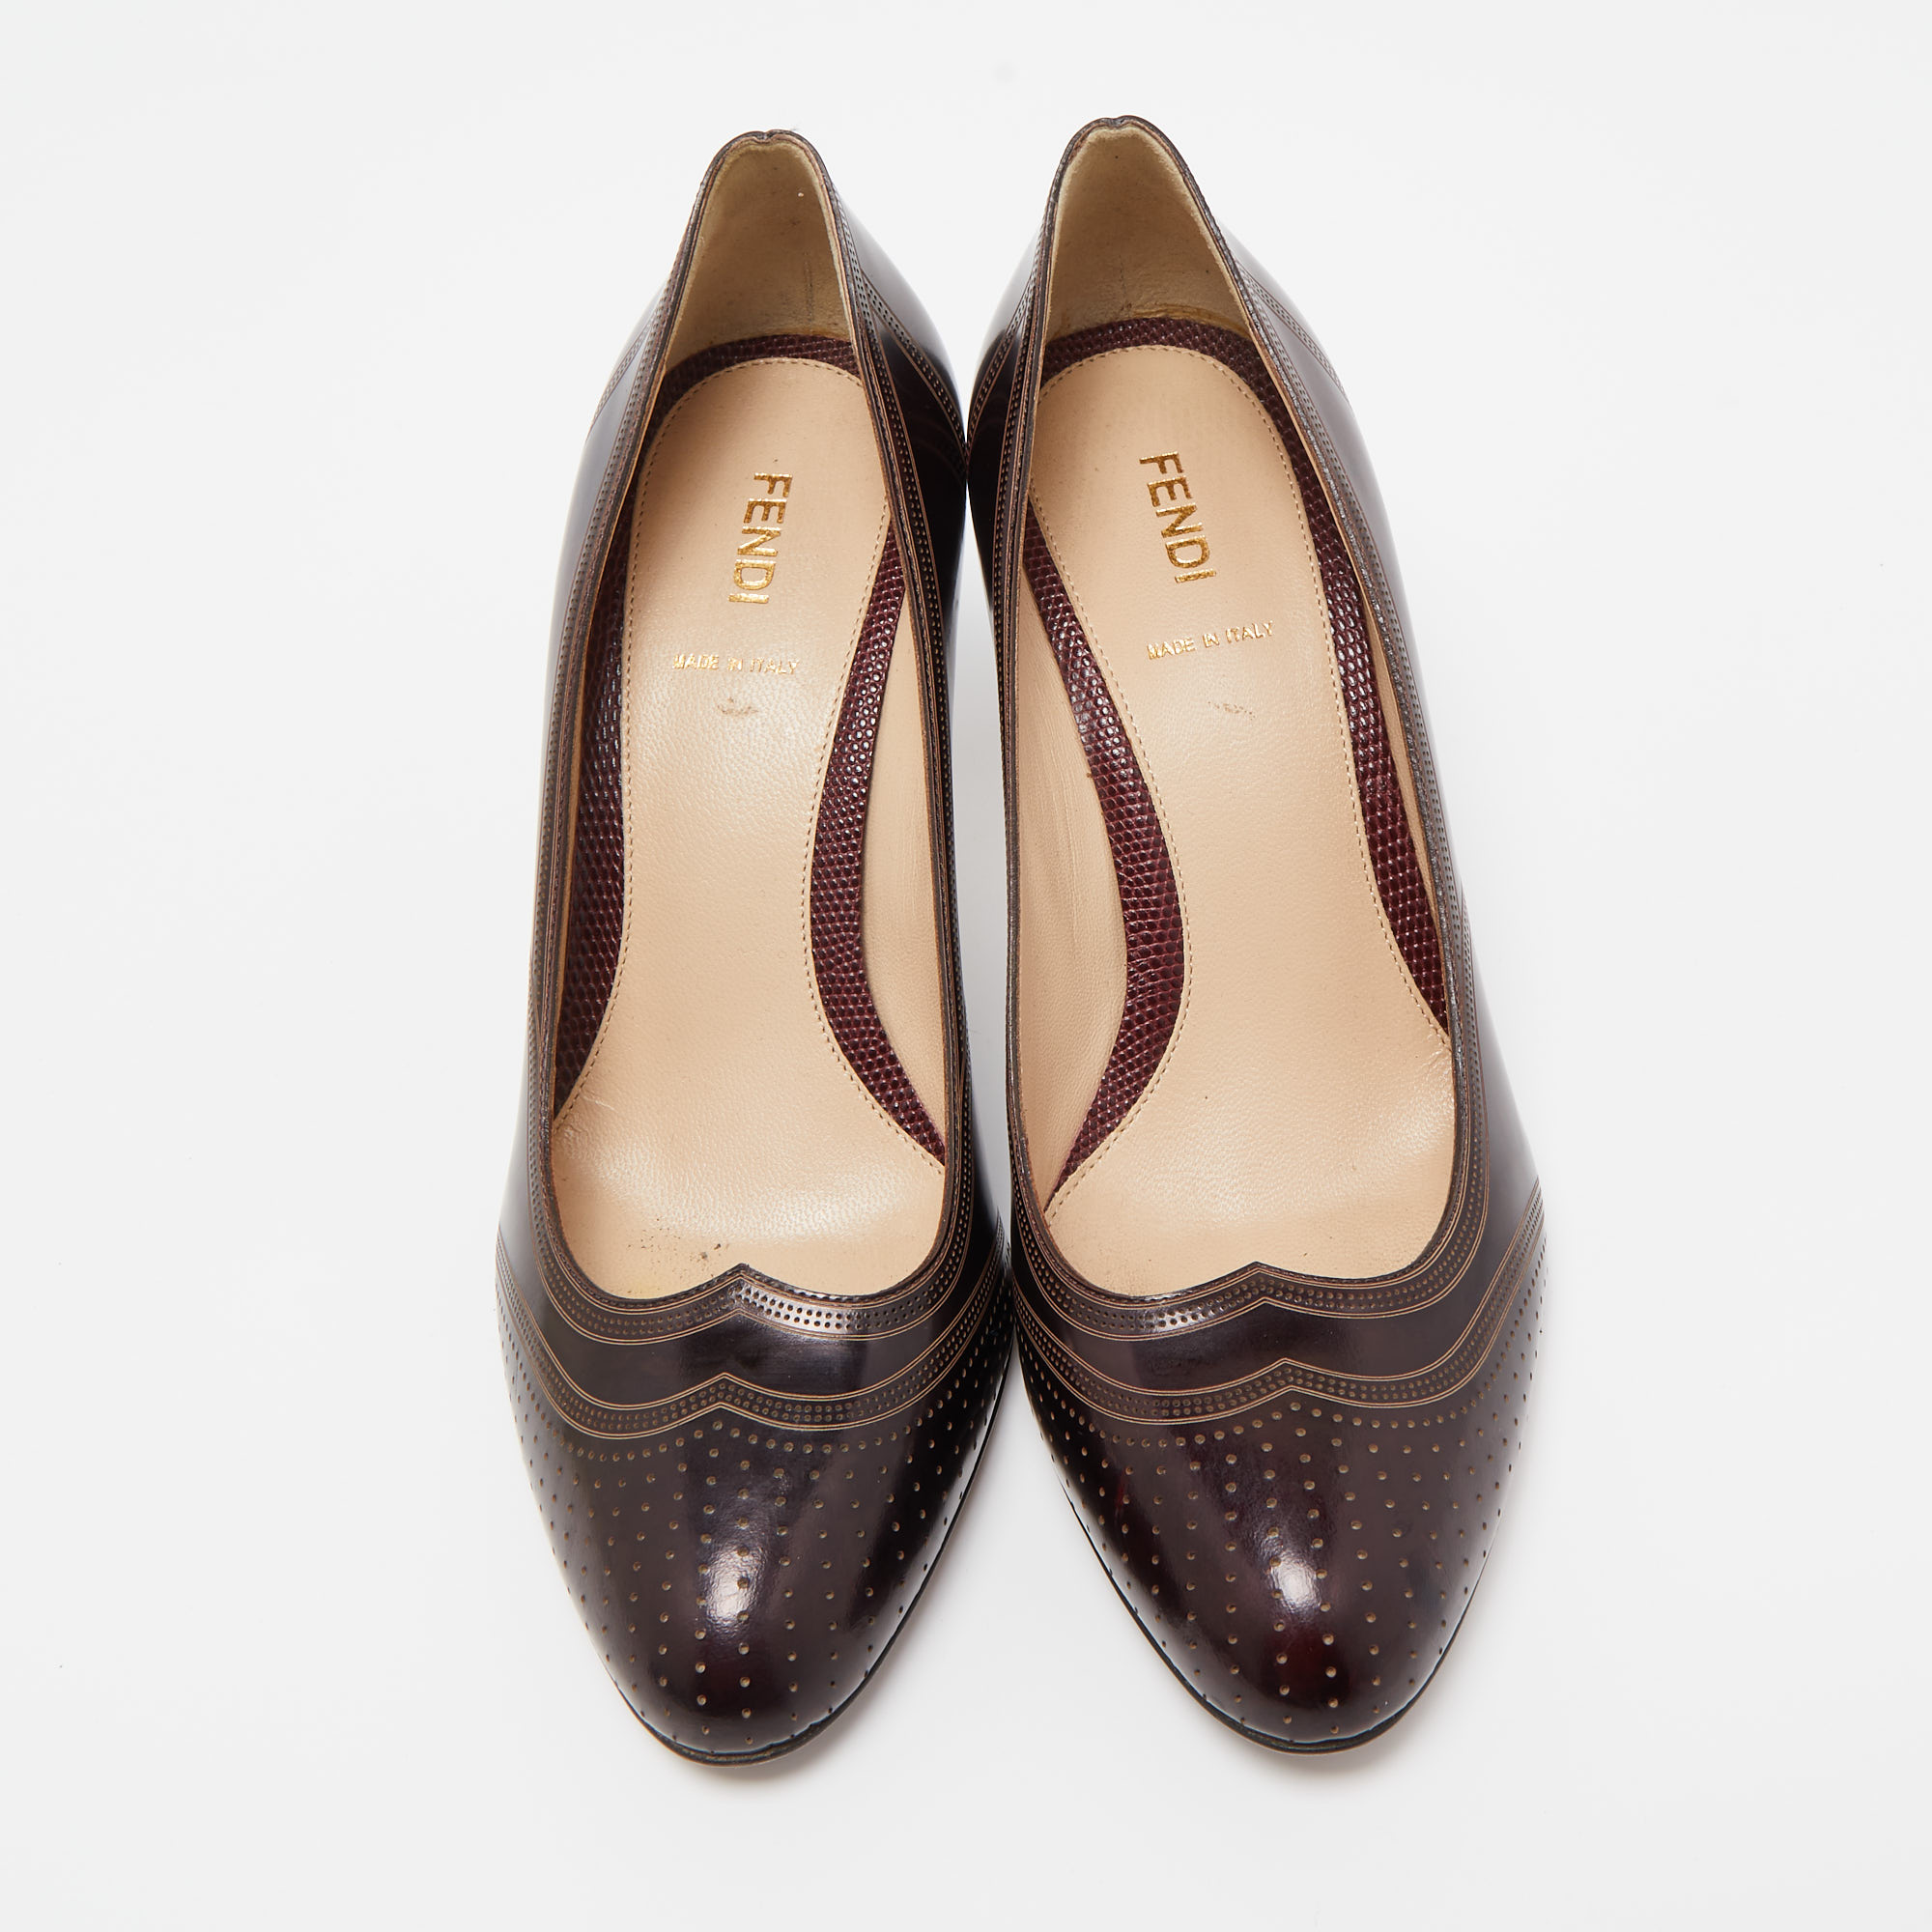 Fendi Brown Leather Perforated Brogue Detail Pumps Size 39.5